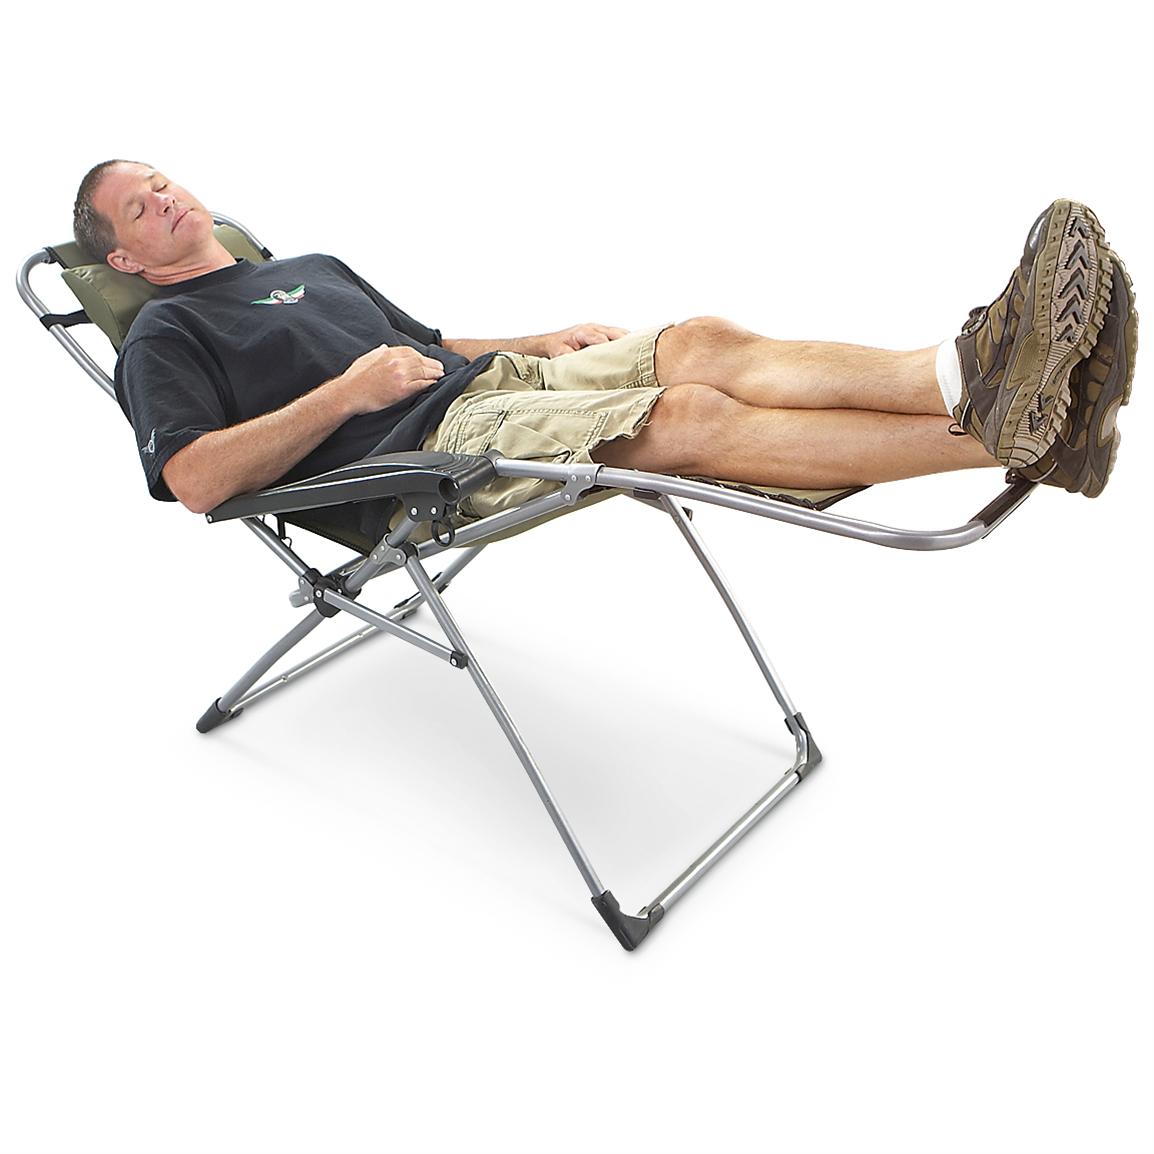 MAC Sports® Anti - gravity Lounger - 190321, Chairs at Sportsman's Guide